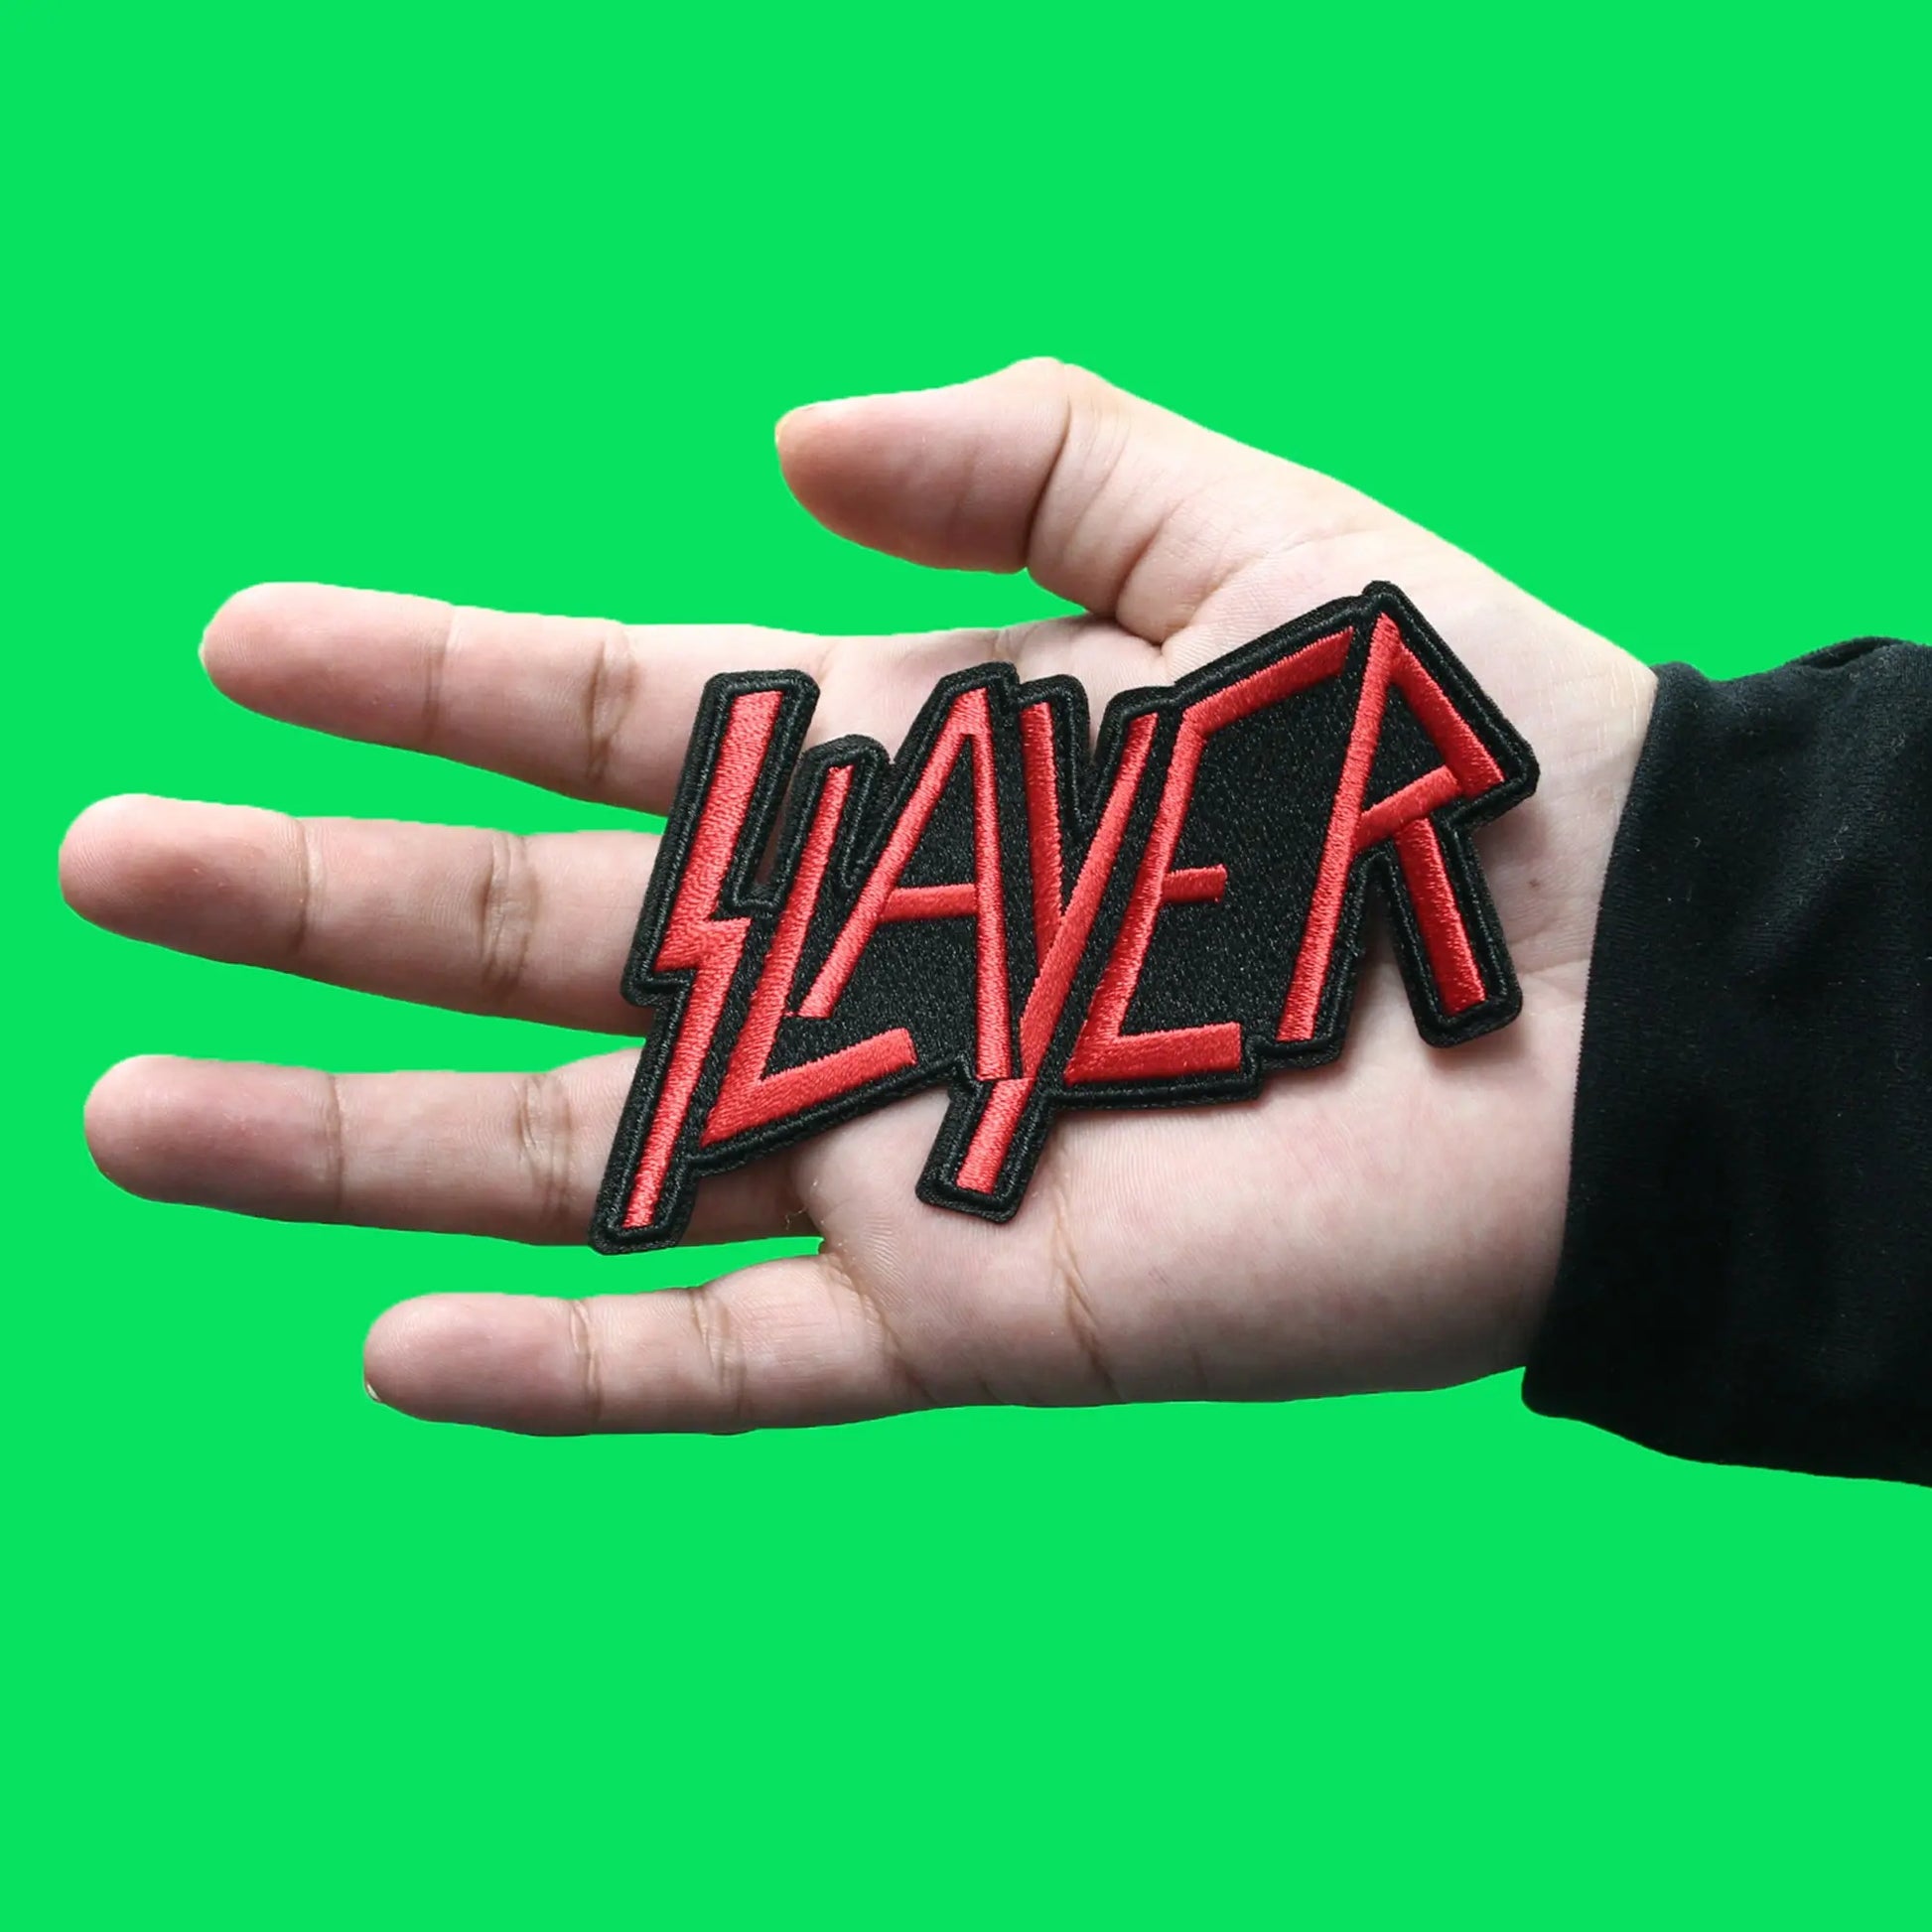 Slayer - Patch - Back Patches - Patch Keychains Stickers -  -  Biggest Patch Shop worldwide